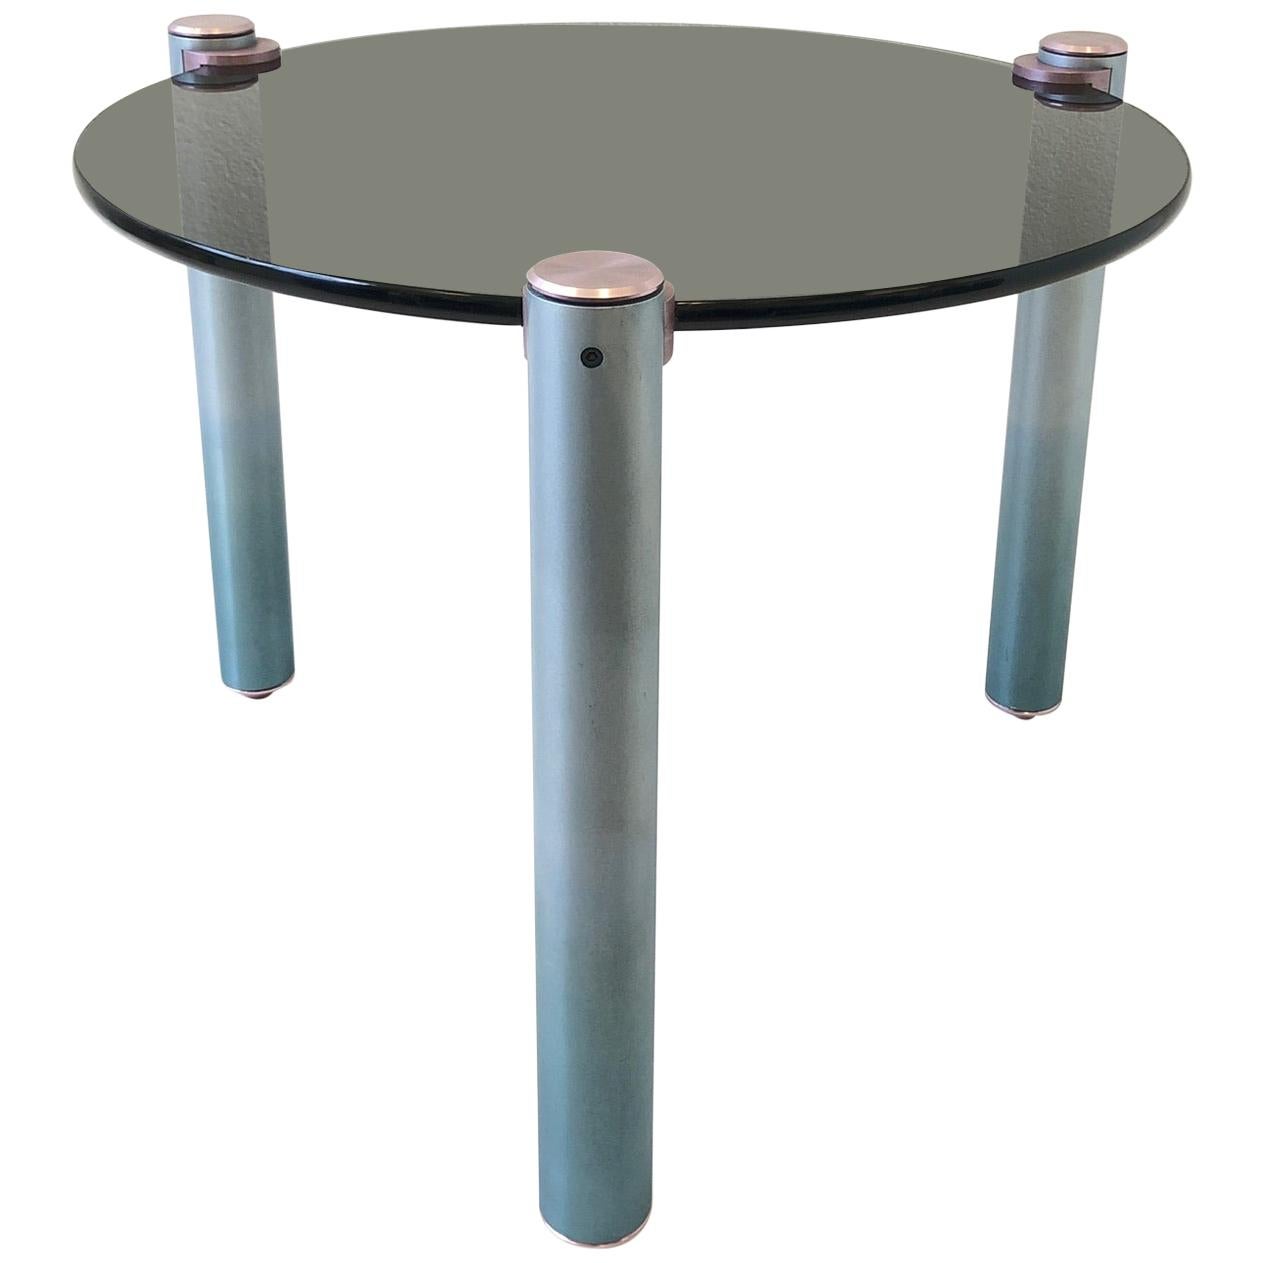 Table d'appoint postmoderne tripode